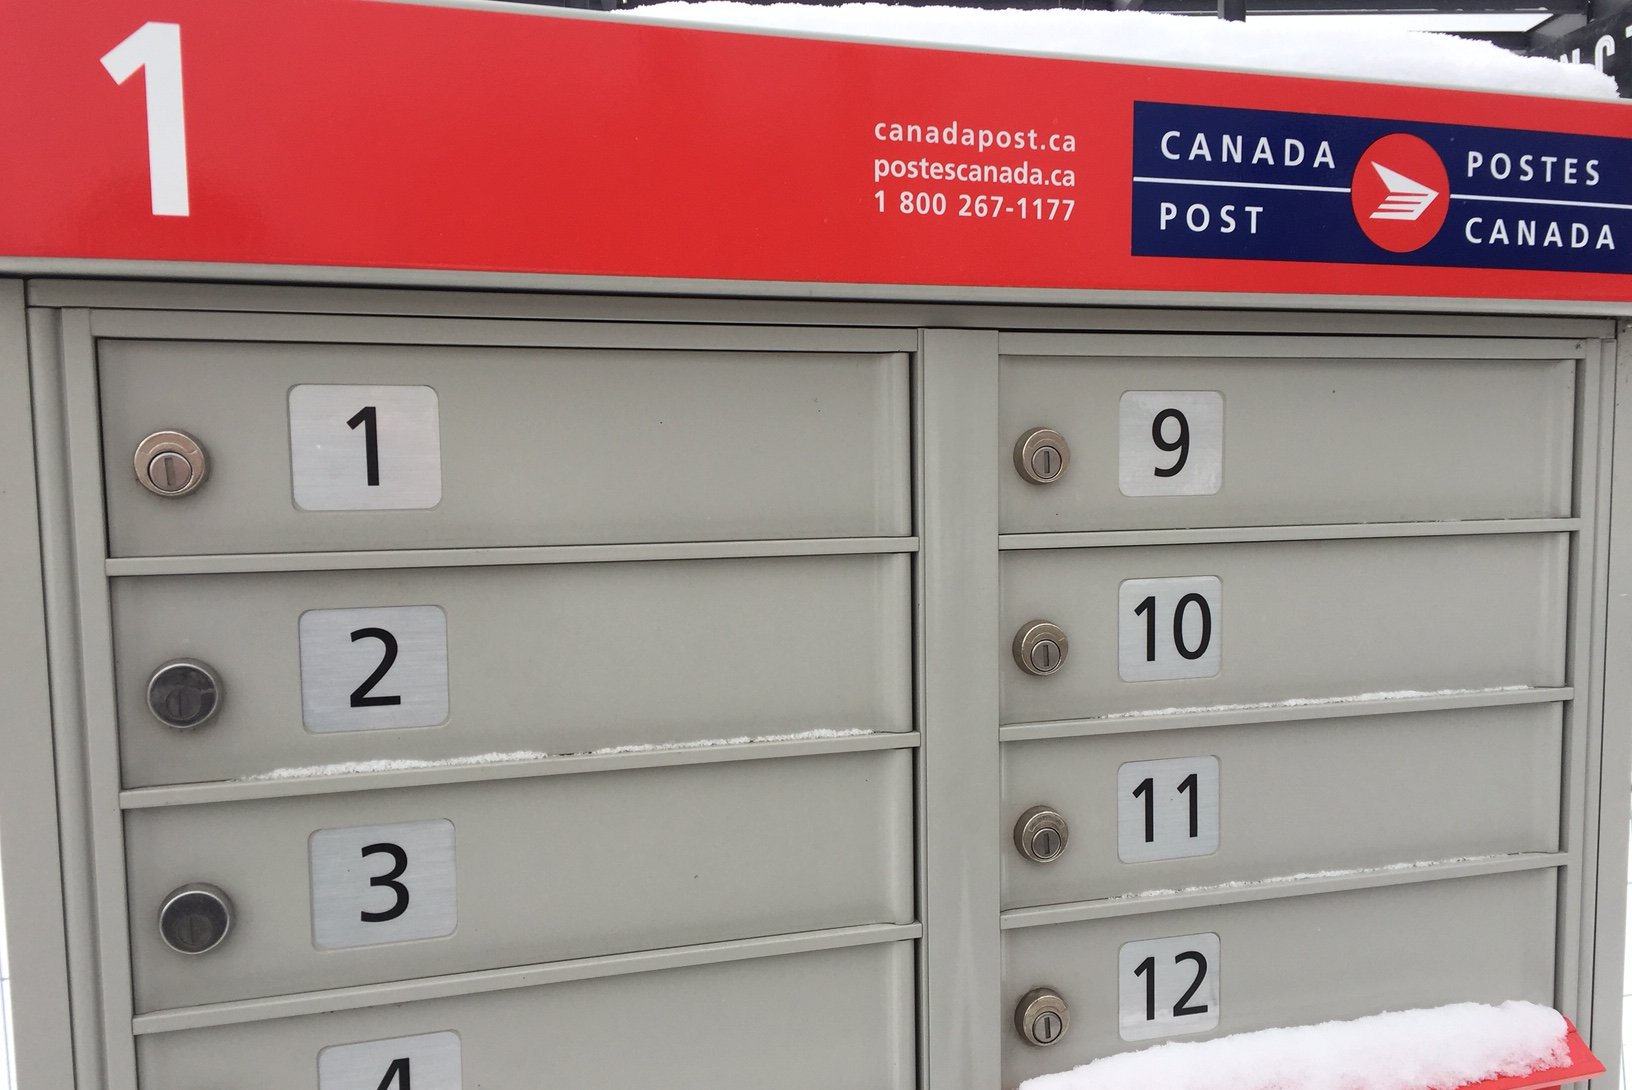 Nova Scotia RCMP are issuing a warning after several community mailboxes were vandalized and their contents stolen.